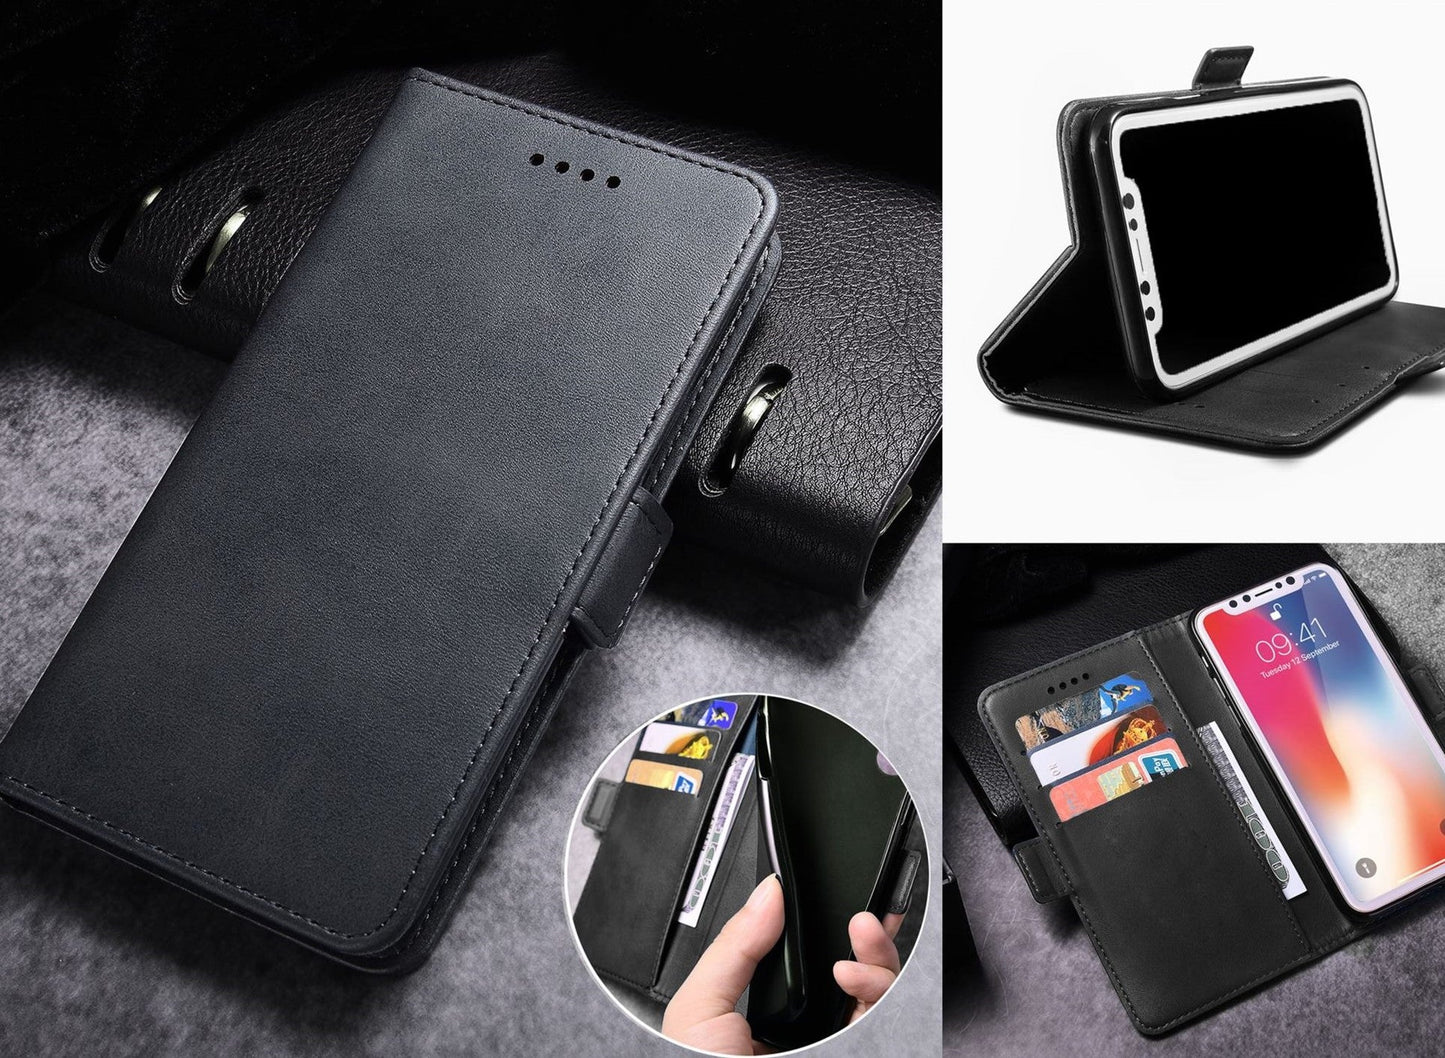 iPhone 11 Pro Max Case Wallet Cover Black